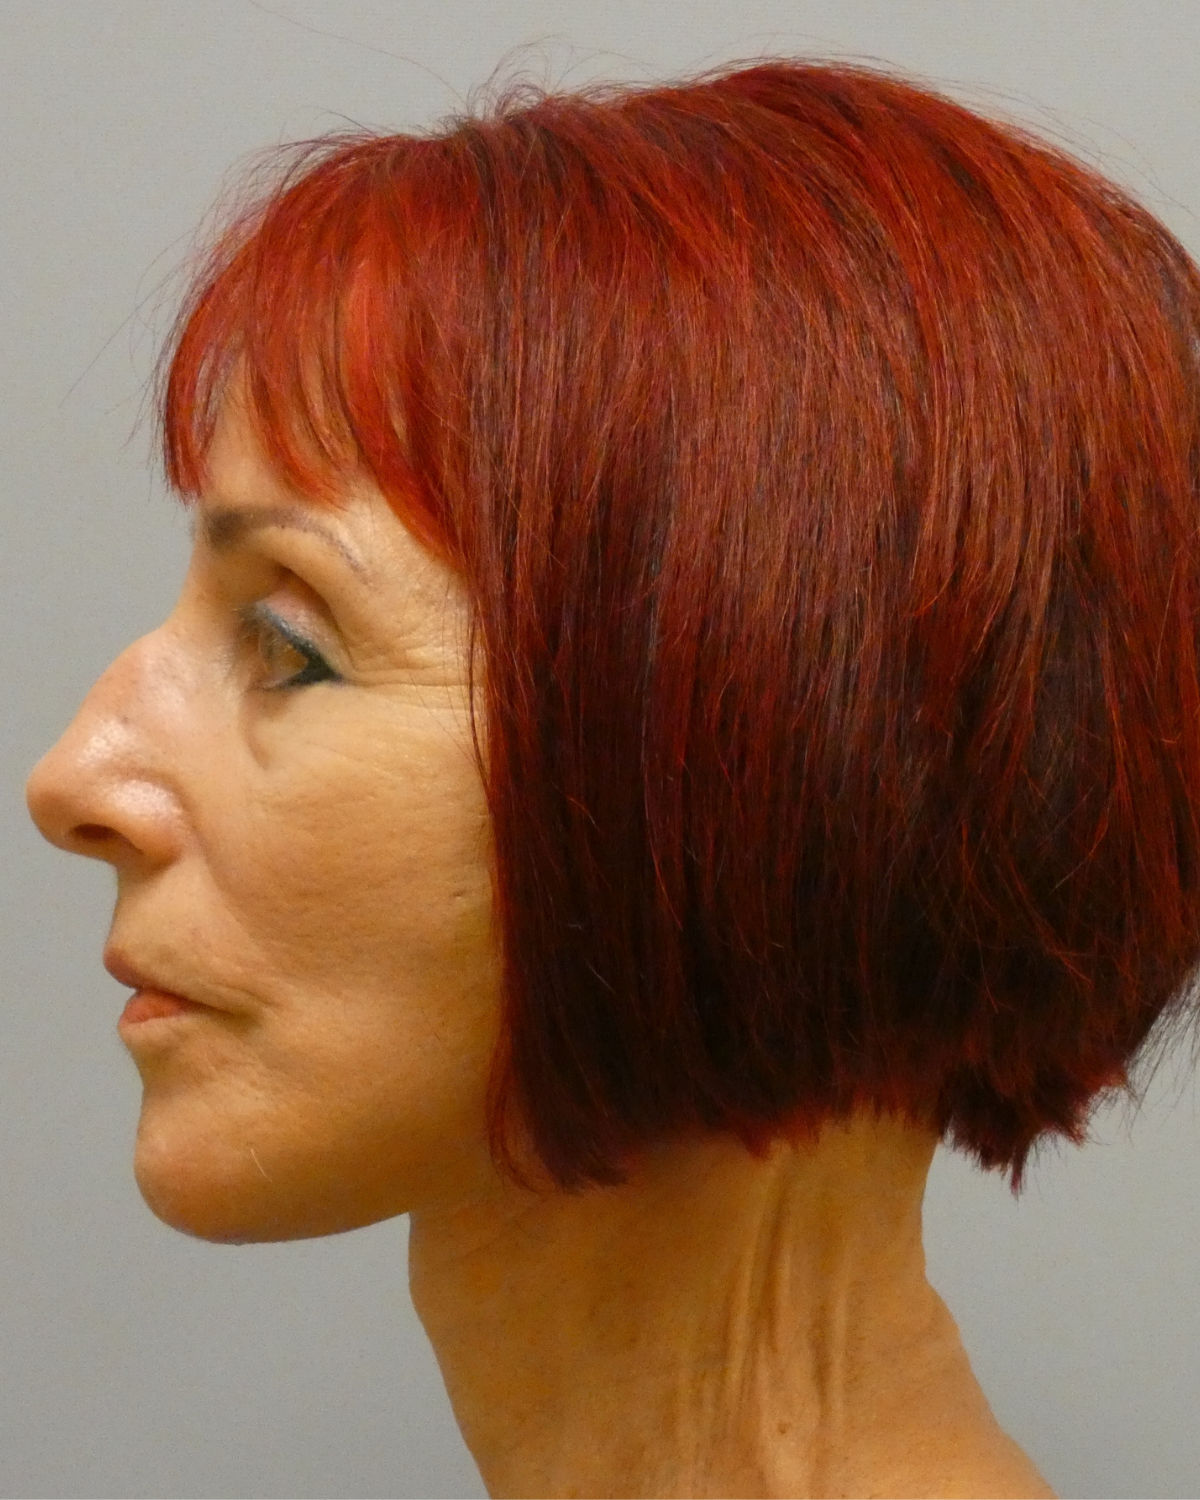 Deep Plane Facelift Gallery After Patient 1